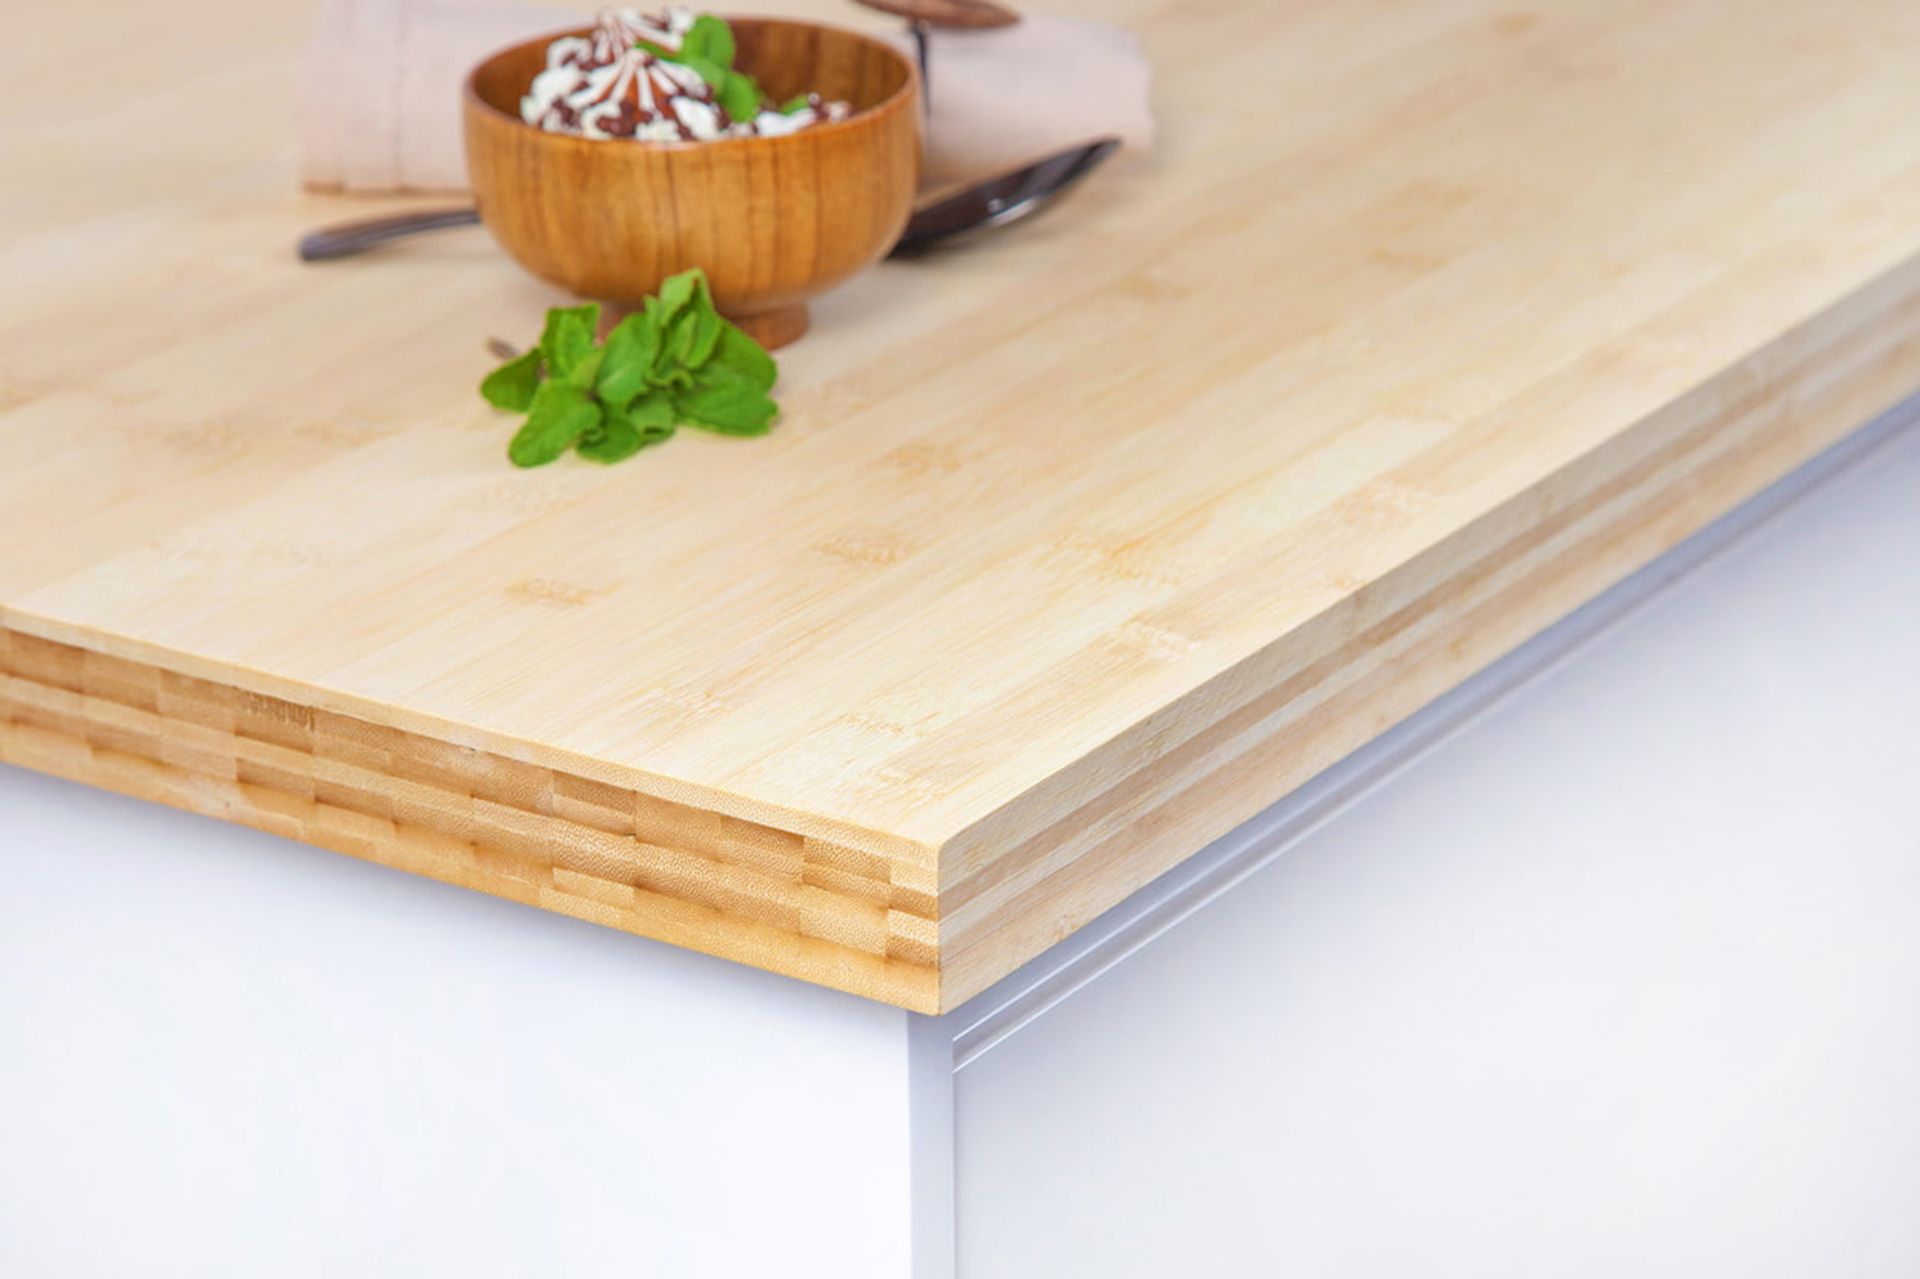 1 x Layered Solid Bamboo Wood Kitchen Worktop - Size: 3000 x 650 x 40mm - Ideal For Kitchens,